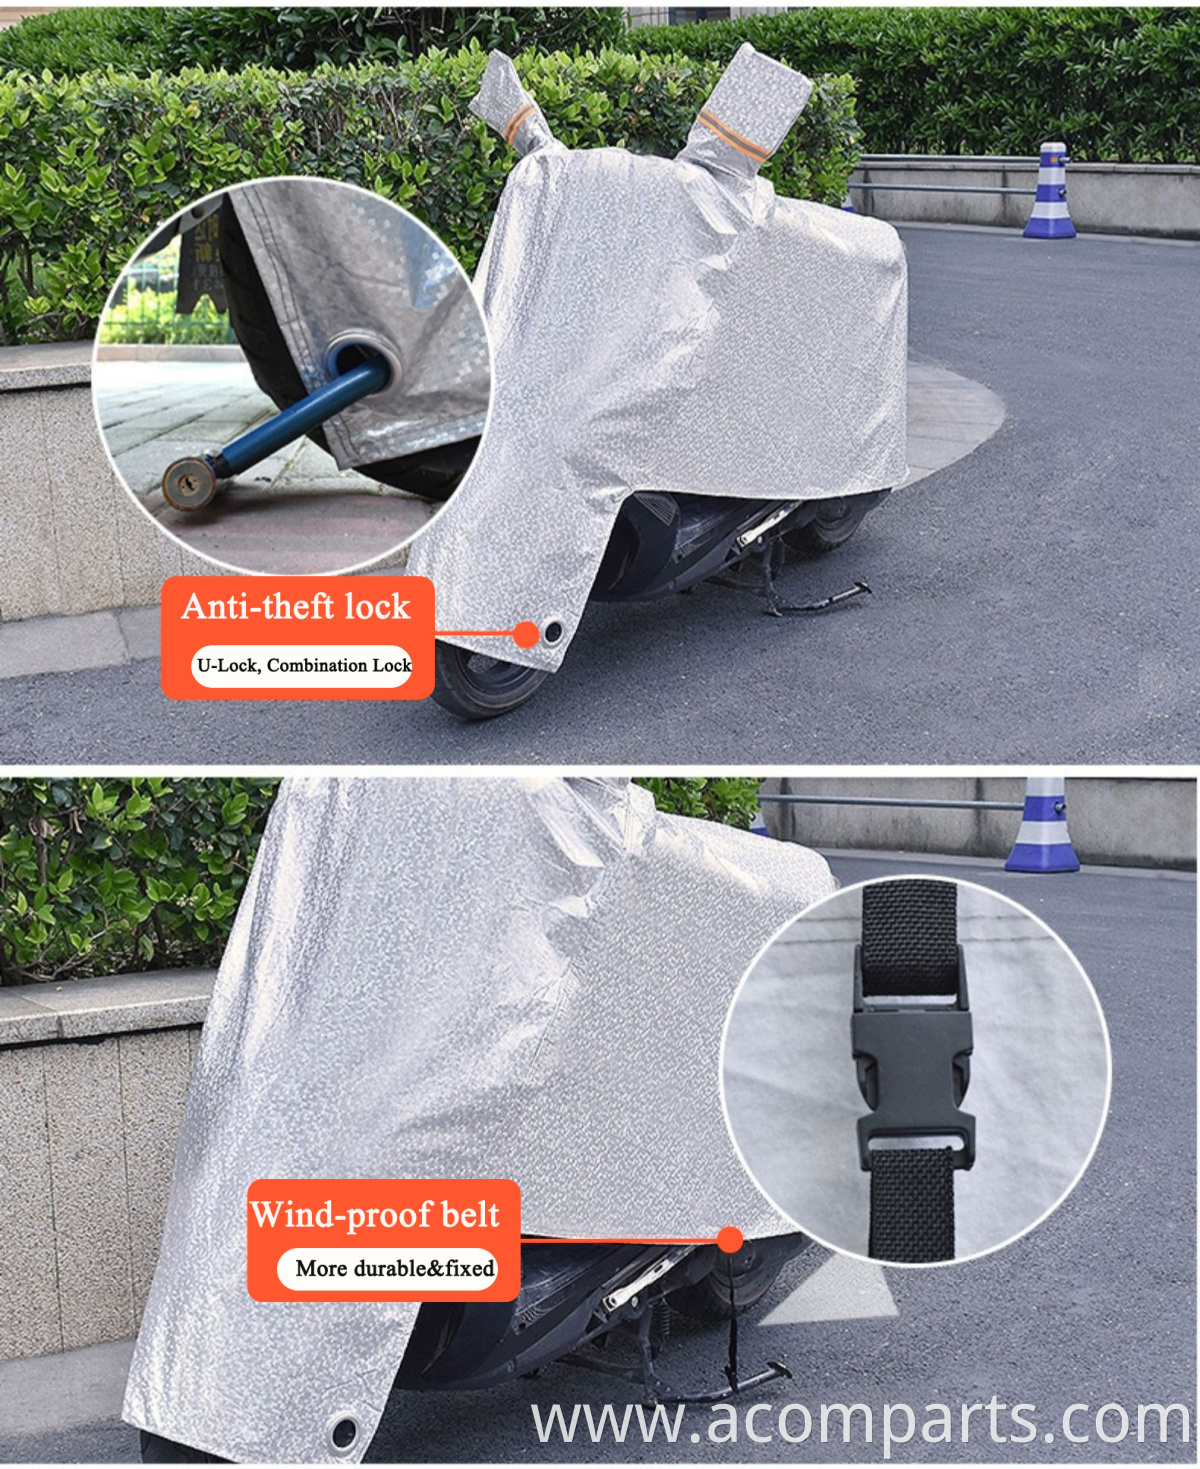 UV reflective anti dust indoor e scooter outdoor water proof motorcycle cover